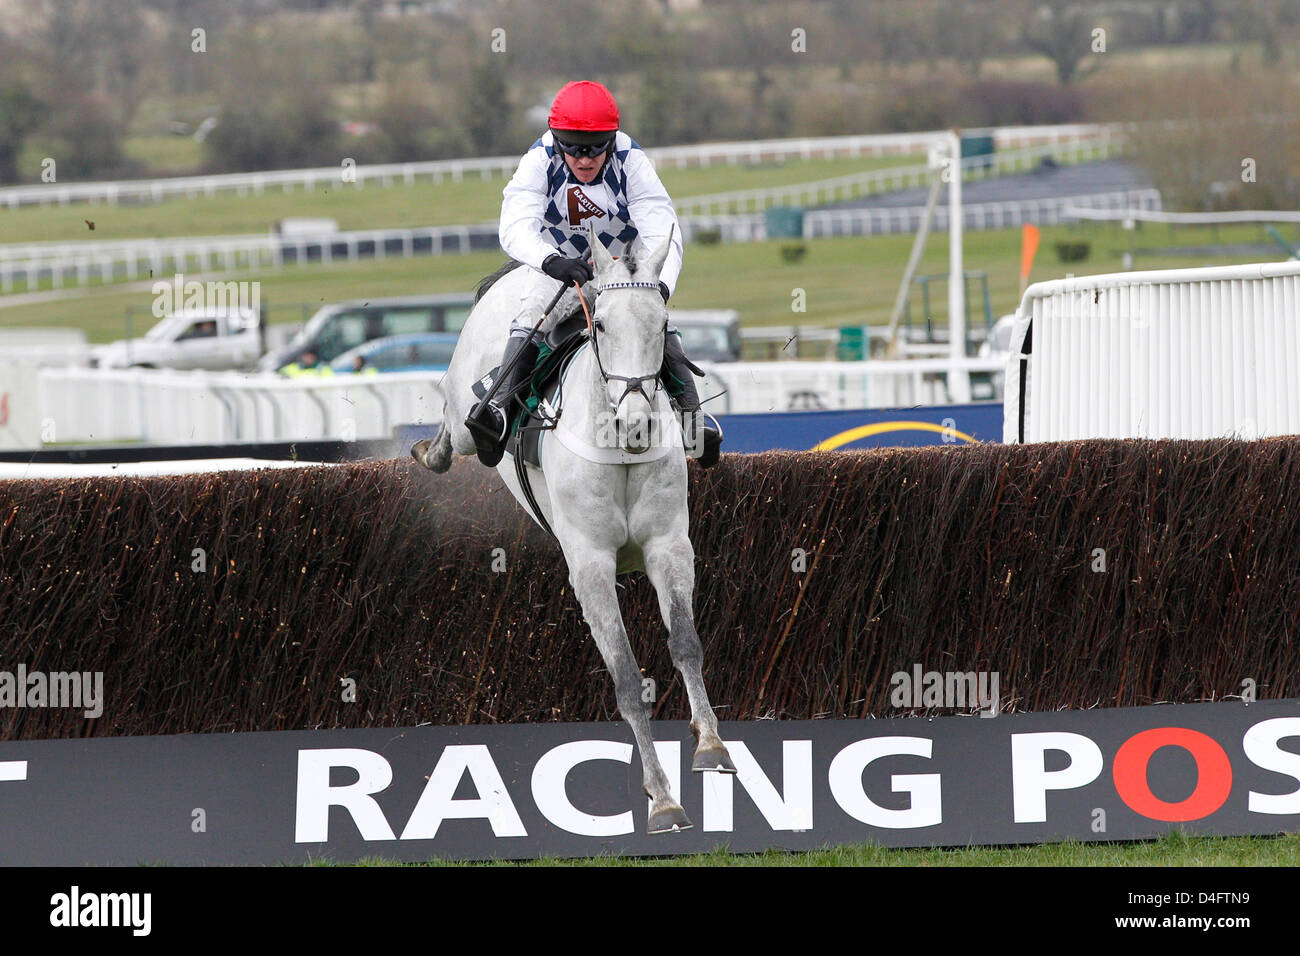 12.03.2013 - Cheltenham; Simonsig, ridden by Barry Geraghty jumping the final fence at the Racing Post Arkle Challenge Trophy Chase Grade 1. Credit: Lajos-Eric Balogh/turfstock.com Stock Photo